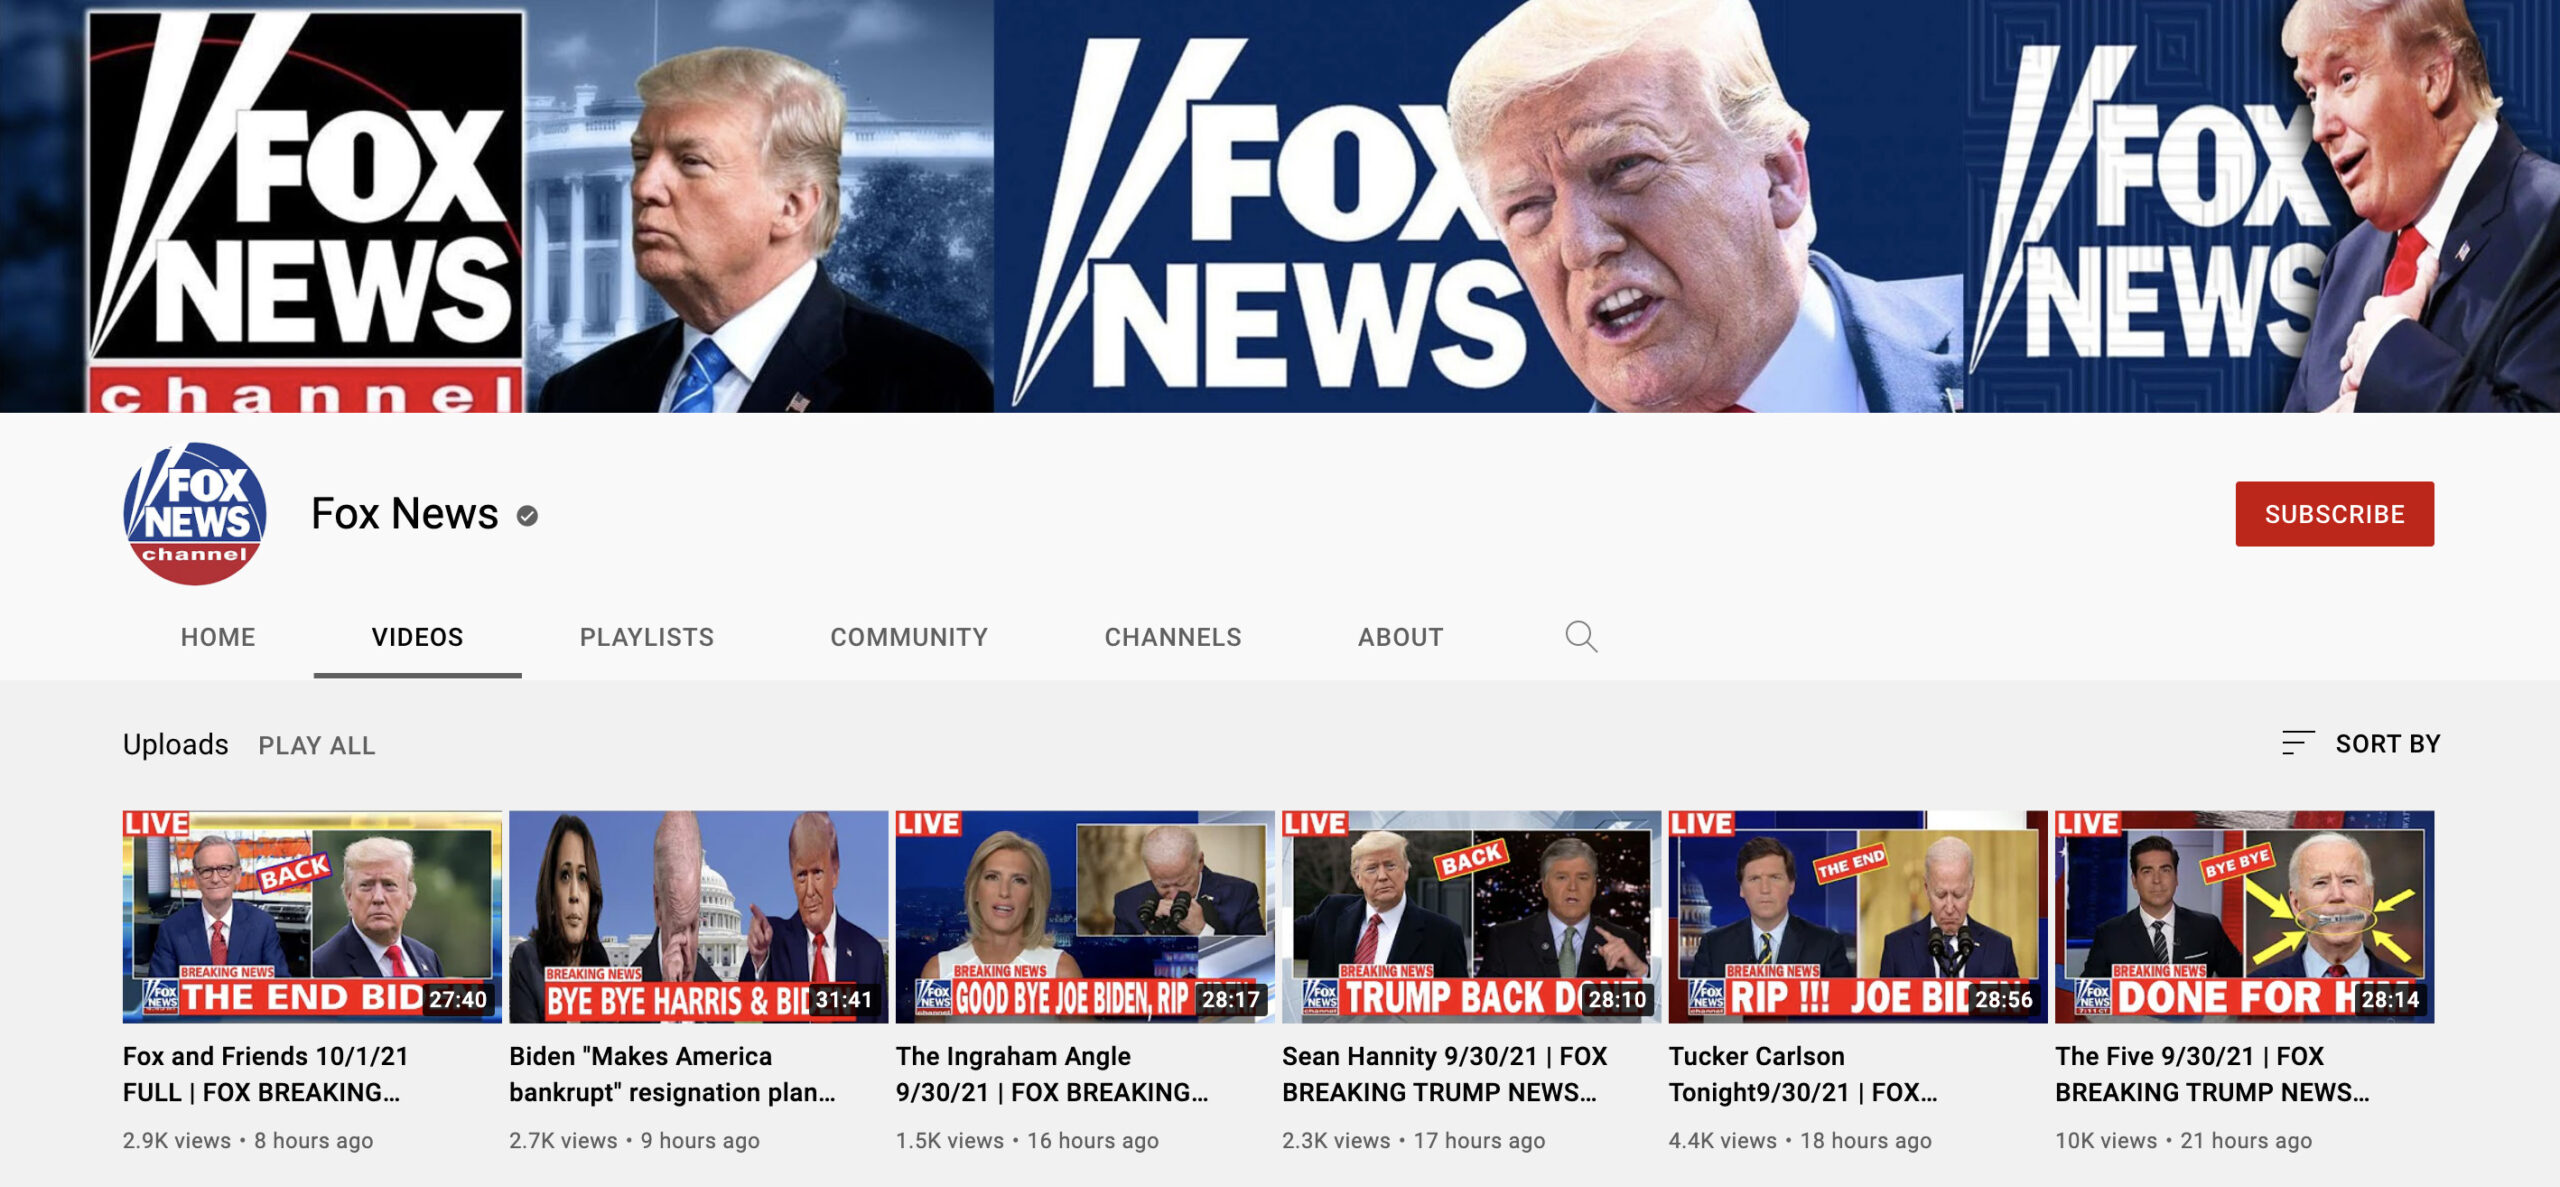 Verified YouTube channels are pushing altered thumbnails on Fox News videos on accounts called Fox News Alert.